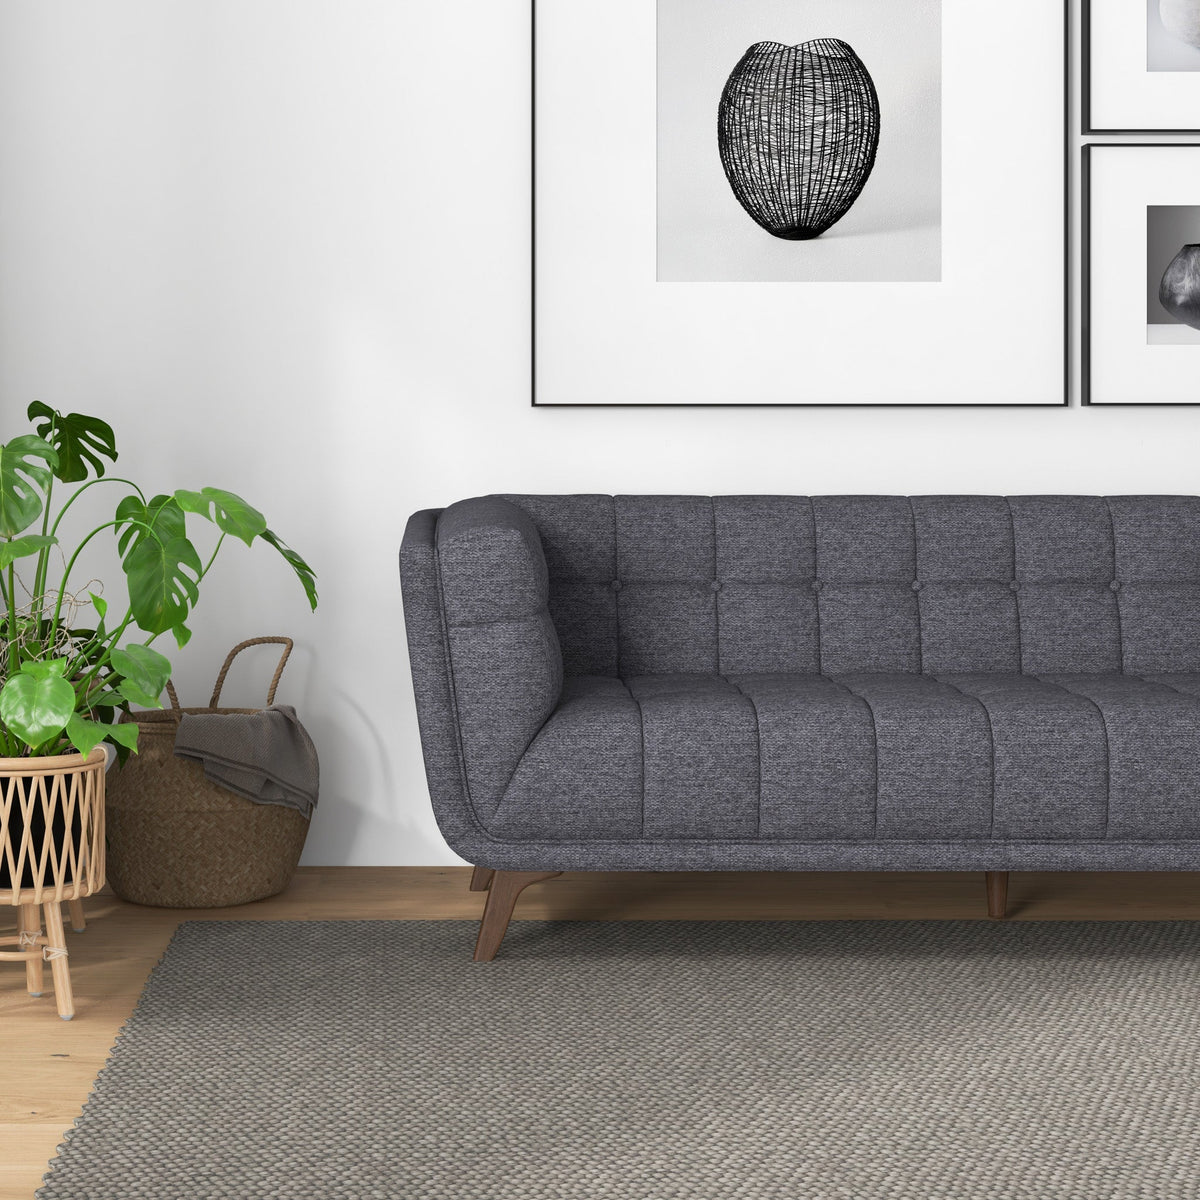 Kano Sofa 86" - Seaside Gray  | Mid in Mod | Houston TX | Best Furniture stores in Houston